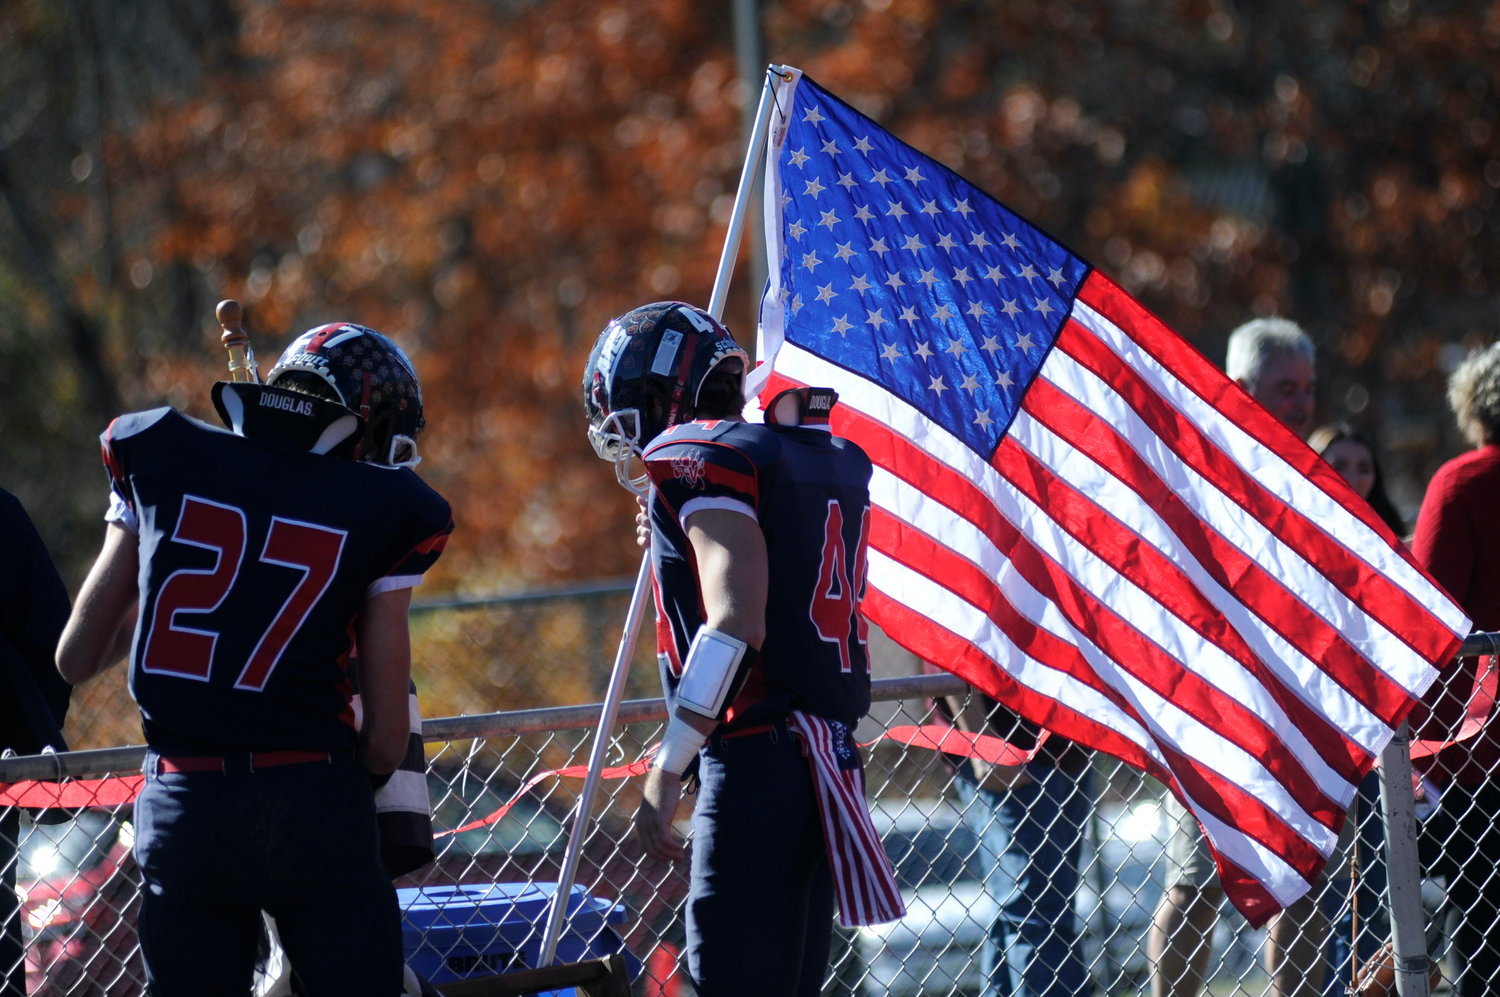 Showing their colors. Before the start of the game, several Bears seniors took to the field with patriotic flags, including Old Glory. Pictured are Ian Mullen and Dylan Poley with the American flag. At 8:24 in the first frame, Poley intercepted a Pine Plains pass to score the game’s first TD in Tri-Valley’s 45-38 win over the Bombers.